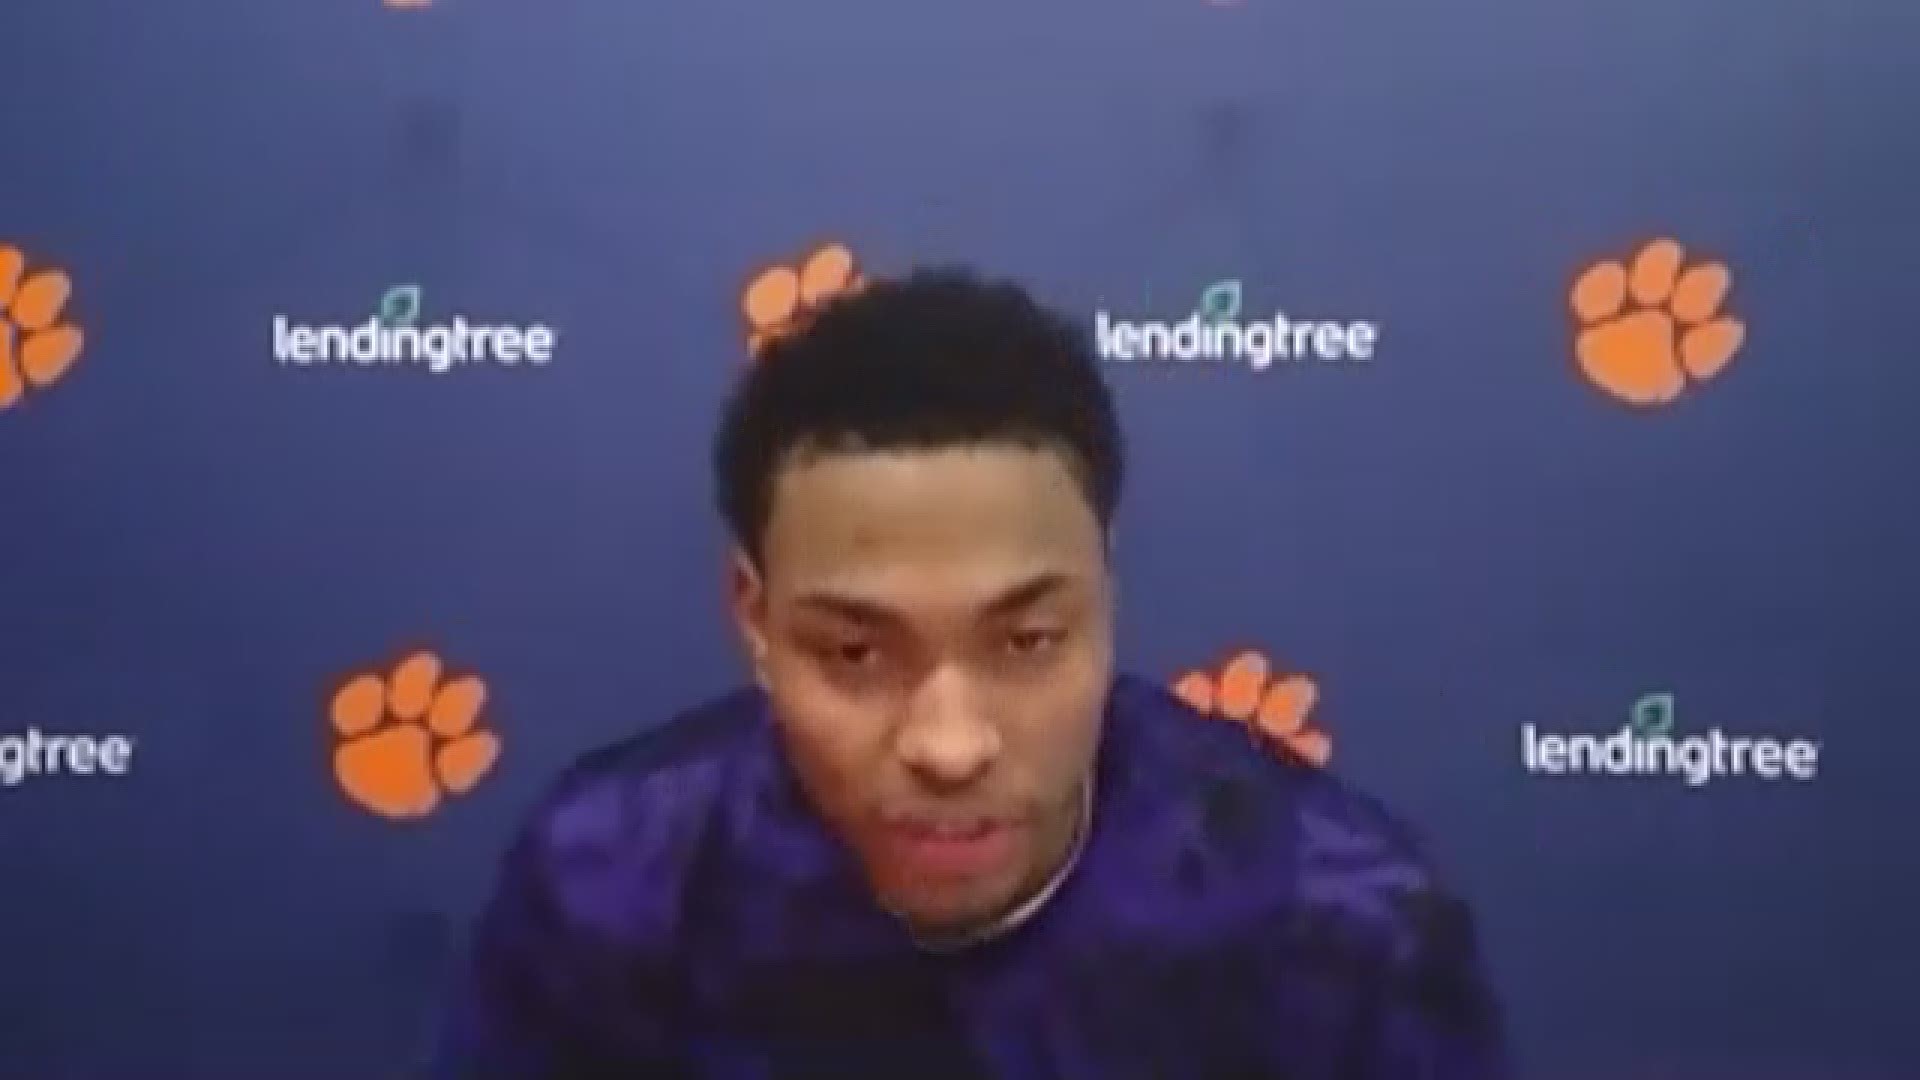 Clemson guard Clyde Trapp from Lower Richland High School and Tiger head coach Brad Brownell speak after the 63-50 win over North Carolina.